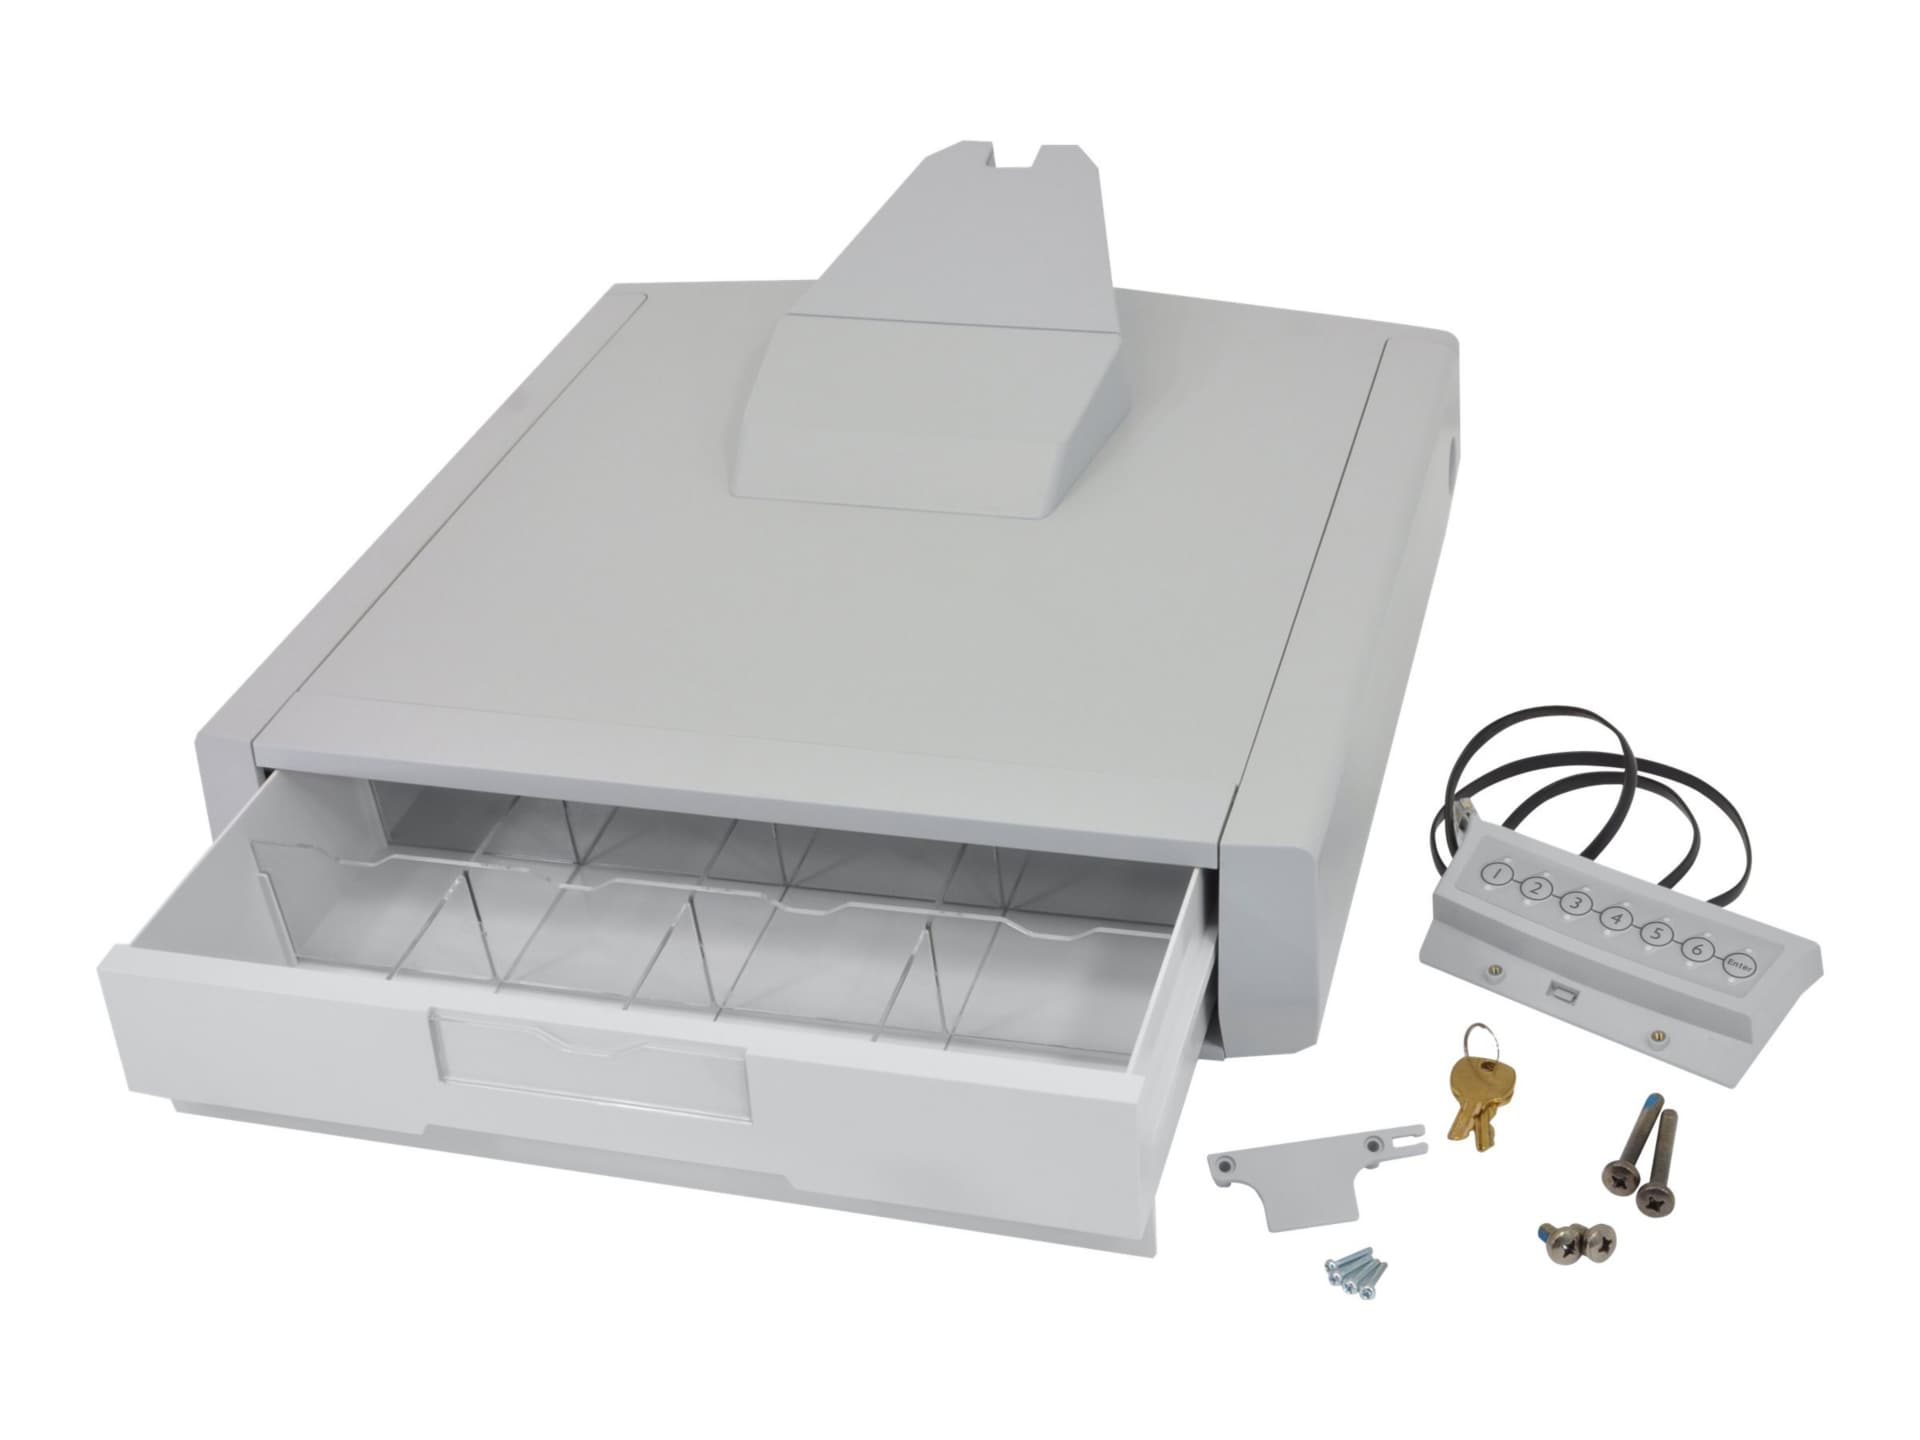 Ergotron SV43 Primary Single Drawer for Laptop Cart mounting component - gray, white